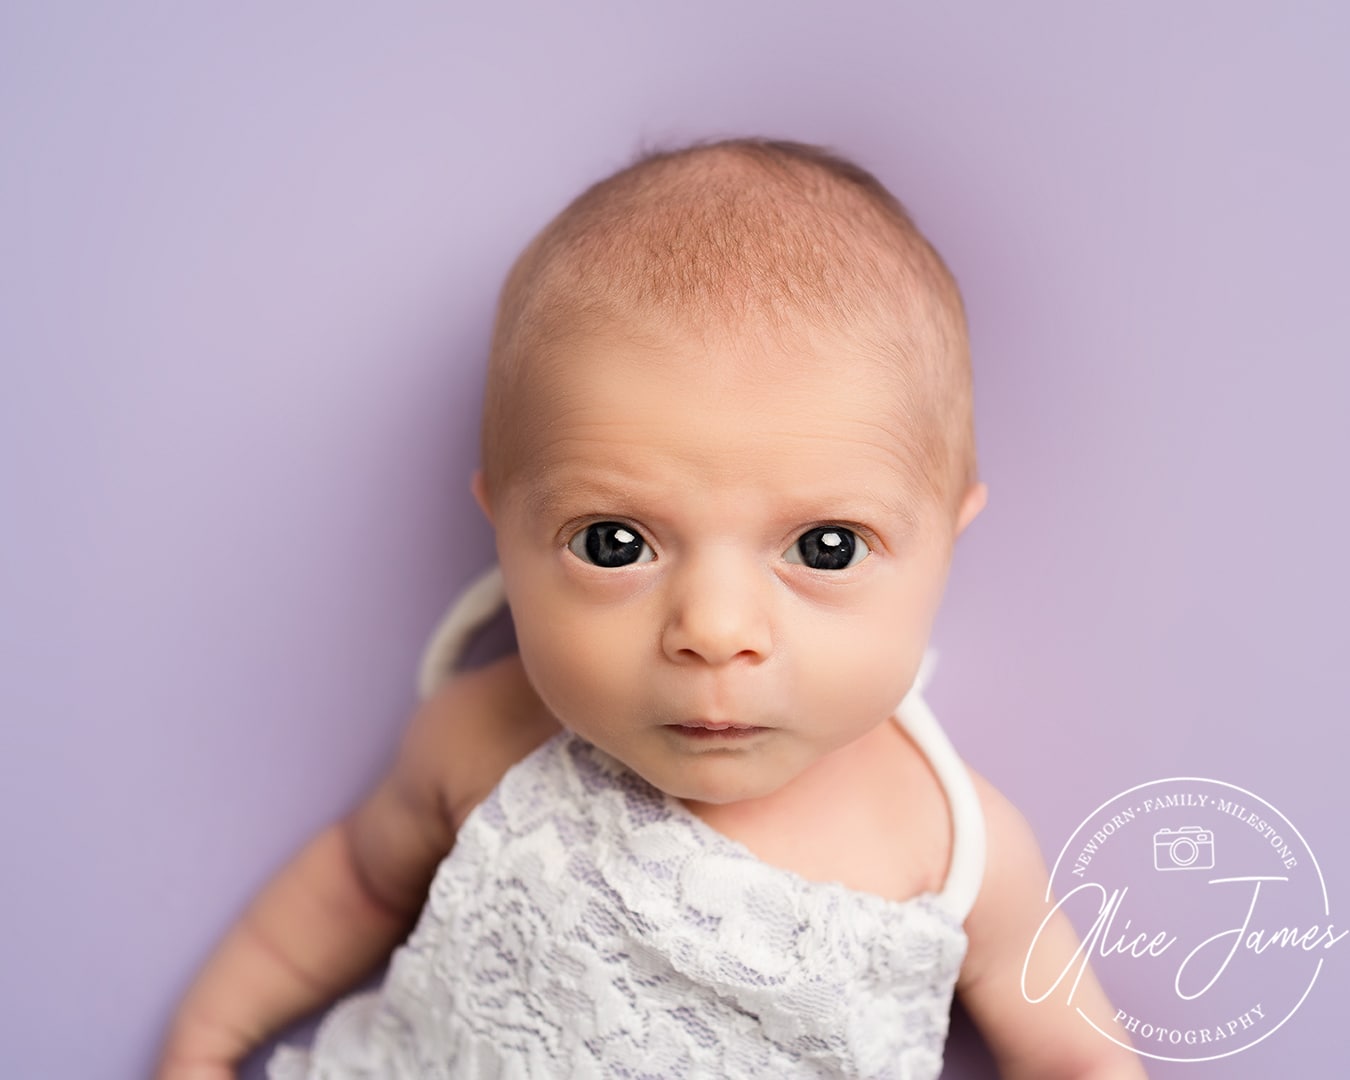 A baby girl wearing a lace romper suit on a lilac background taken at her baby photoshoot Hitchin.